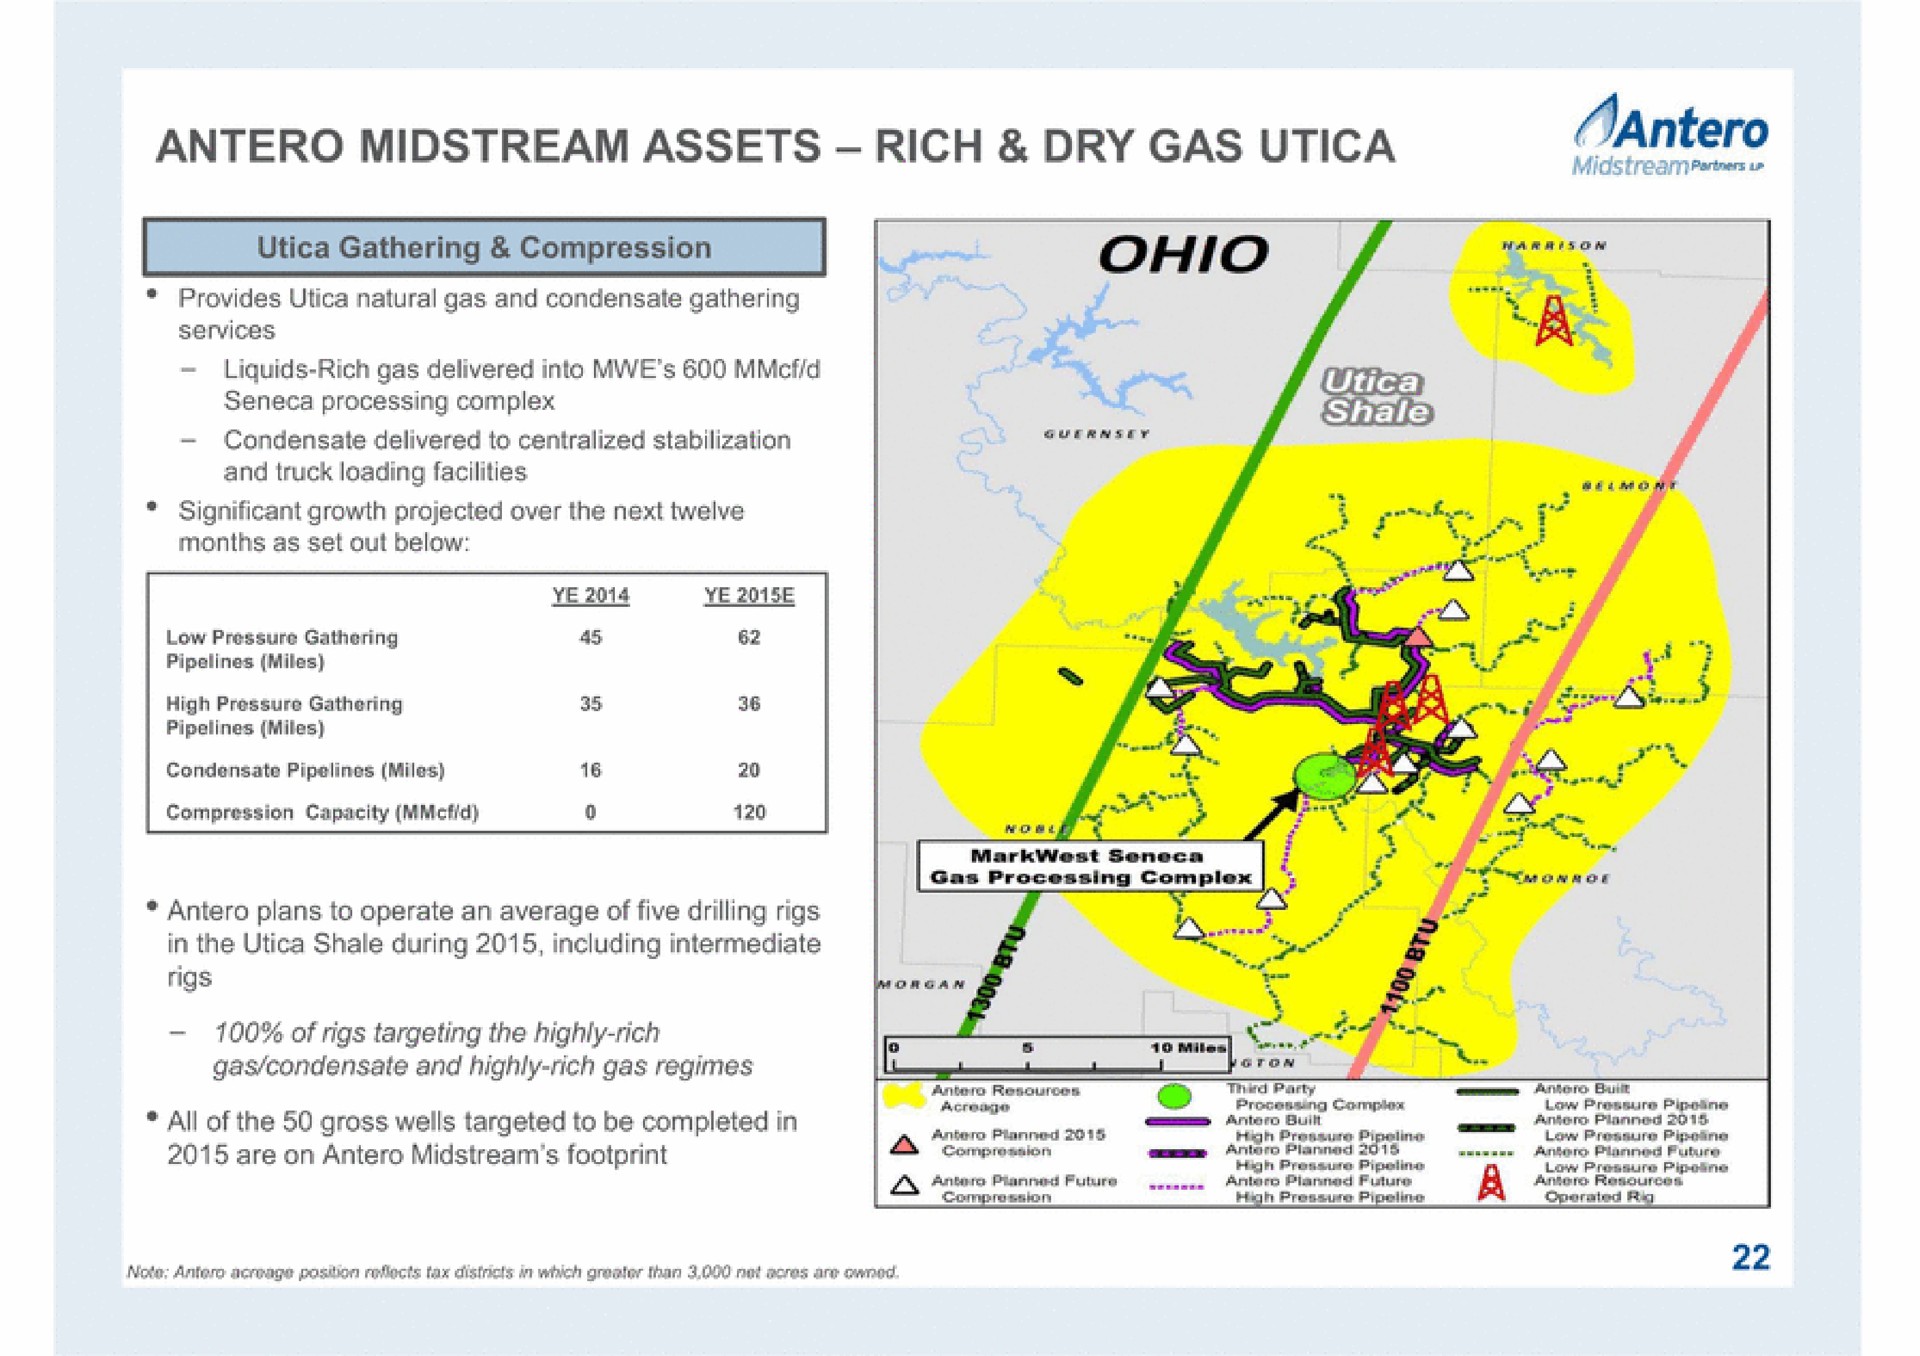 midstream assets rich dry gas all of the gross wells targeted to be completed in ween i | Antero Midstream Partners